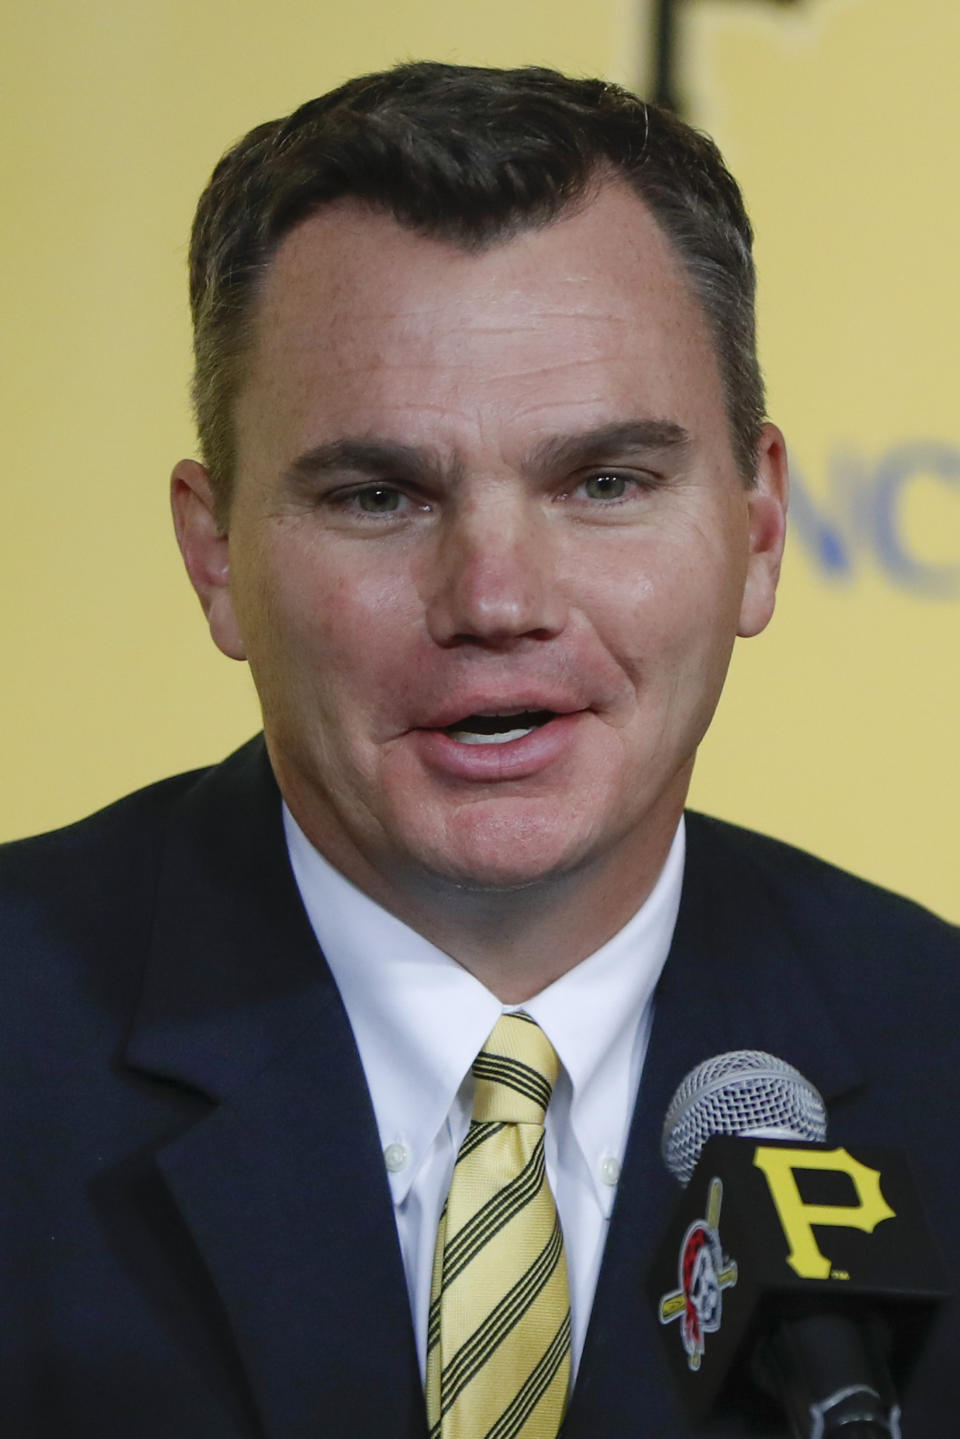 Ben Cherington answers questions during a news conference where he was introduced as the new general manager of the Pittsburgh Pirates baseball team, Monday, Nov. 18, 2019, in Pittsburgh.(AP Photo/Keith Srakocic)